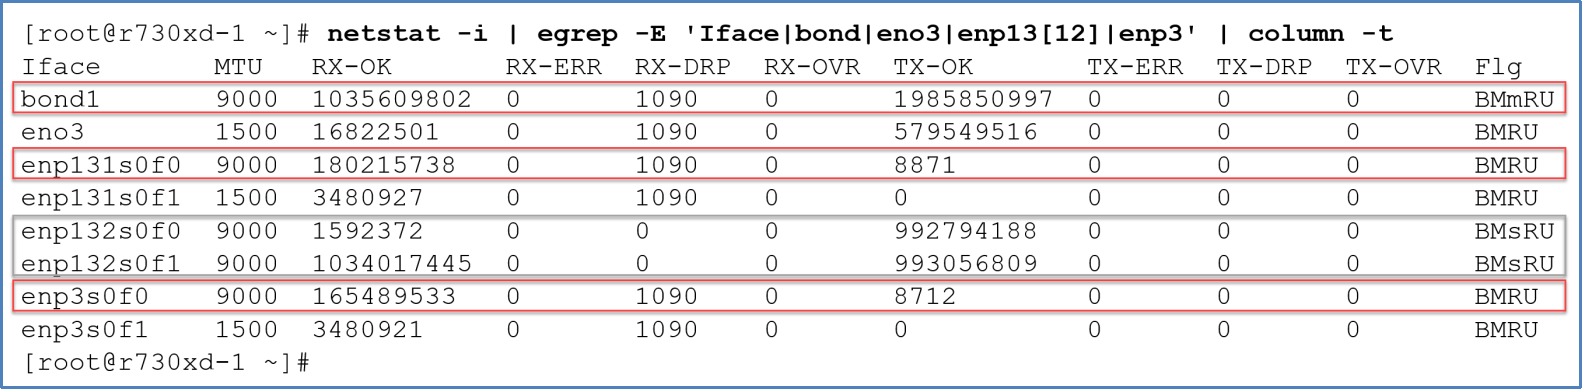 This diagram show a Linux session monitoring the network statistics of the Linux interfaces used by Oracle's dNFS control traffic through a bonded interface, and Oracle dNFS data traffic through two non-bonded interfaces.